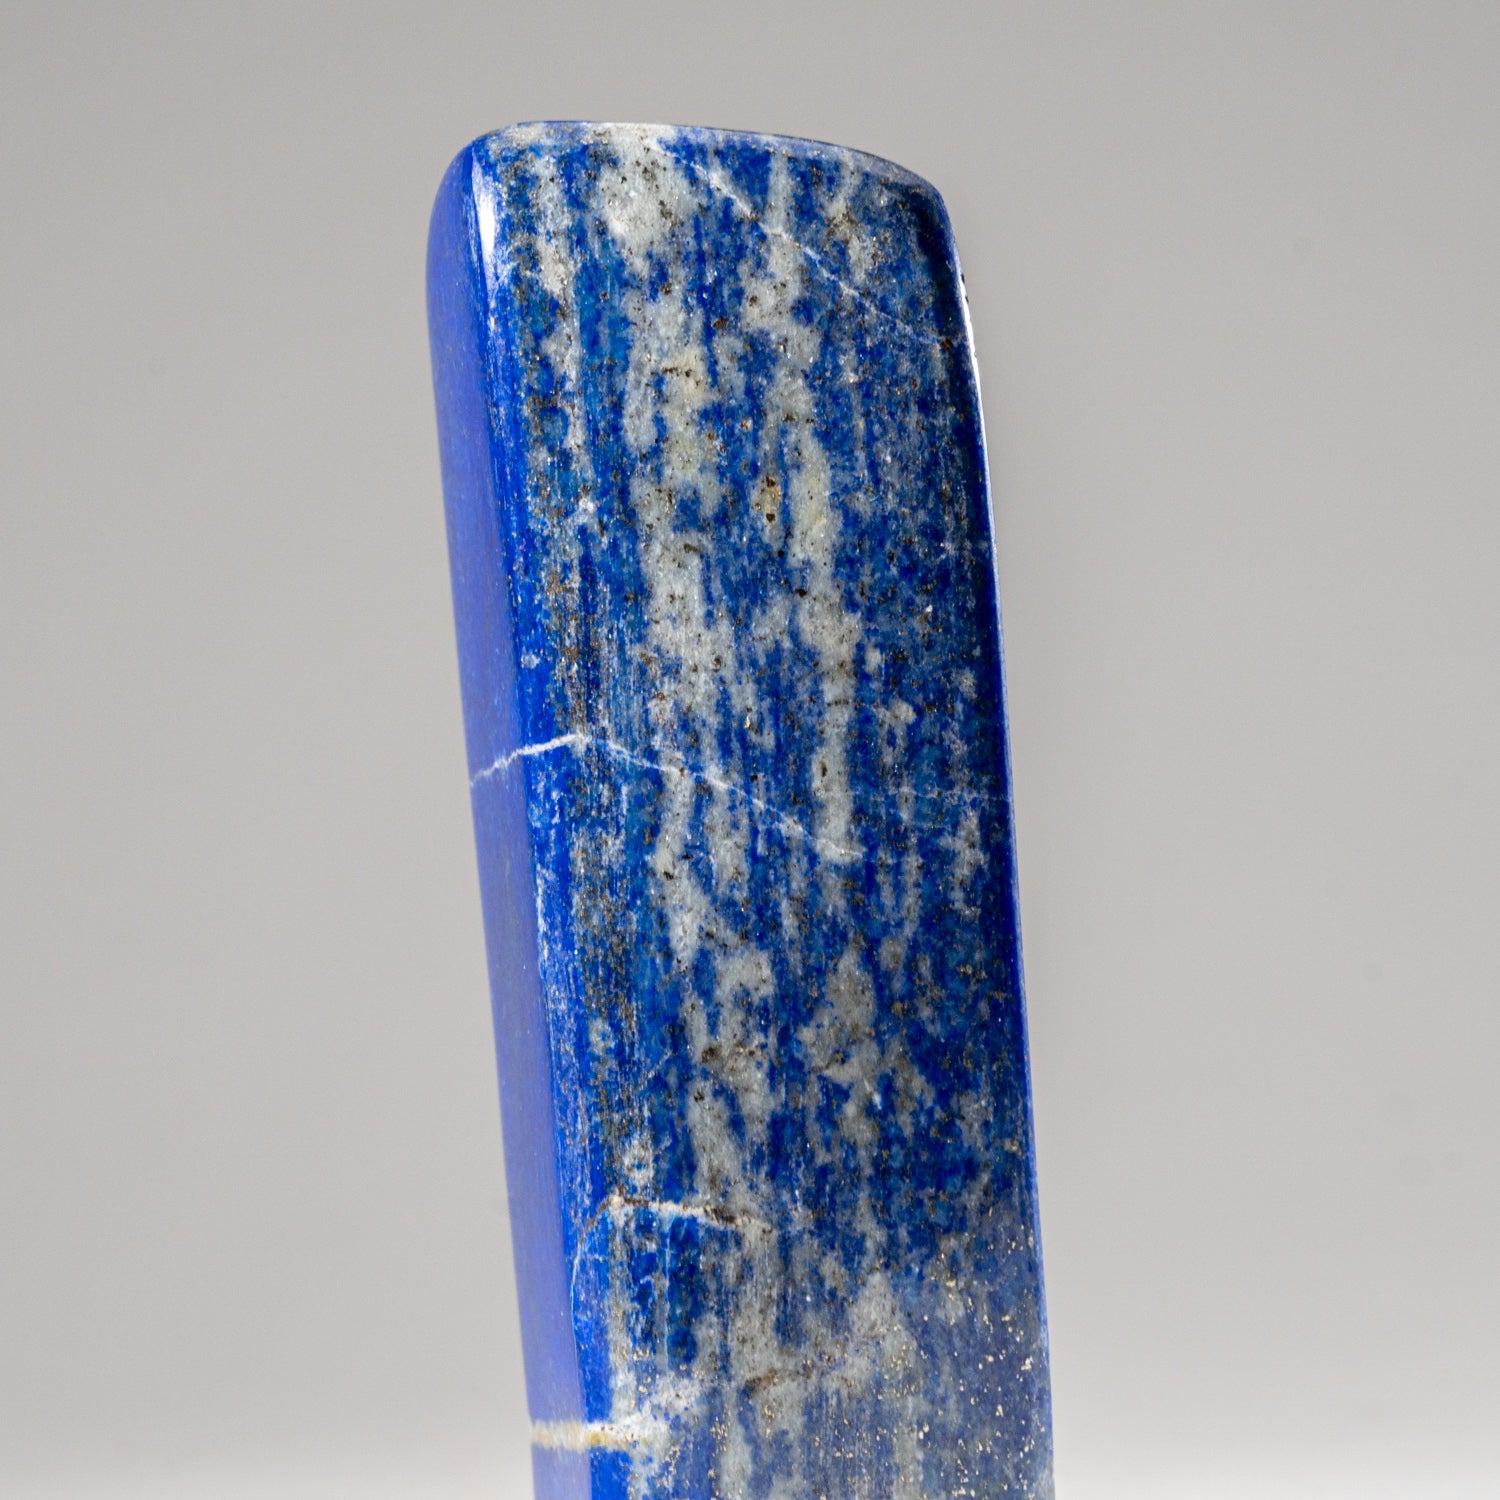 Polished Lapis Lazuli Freeform from Afghanistan (258.8 grams)